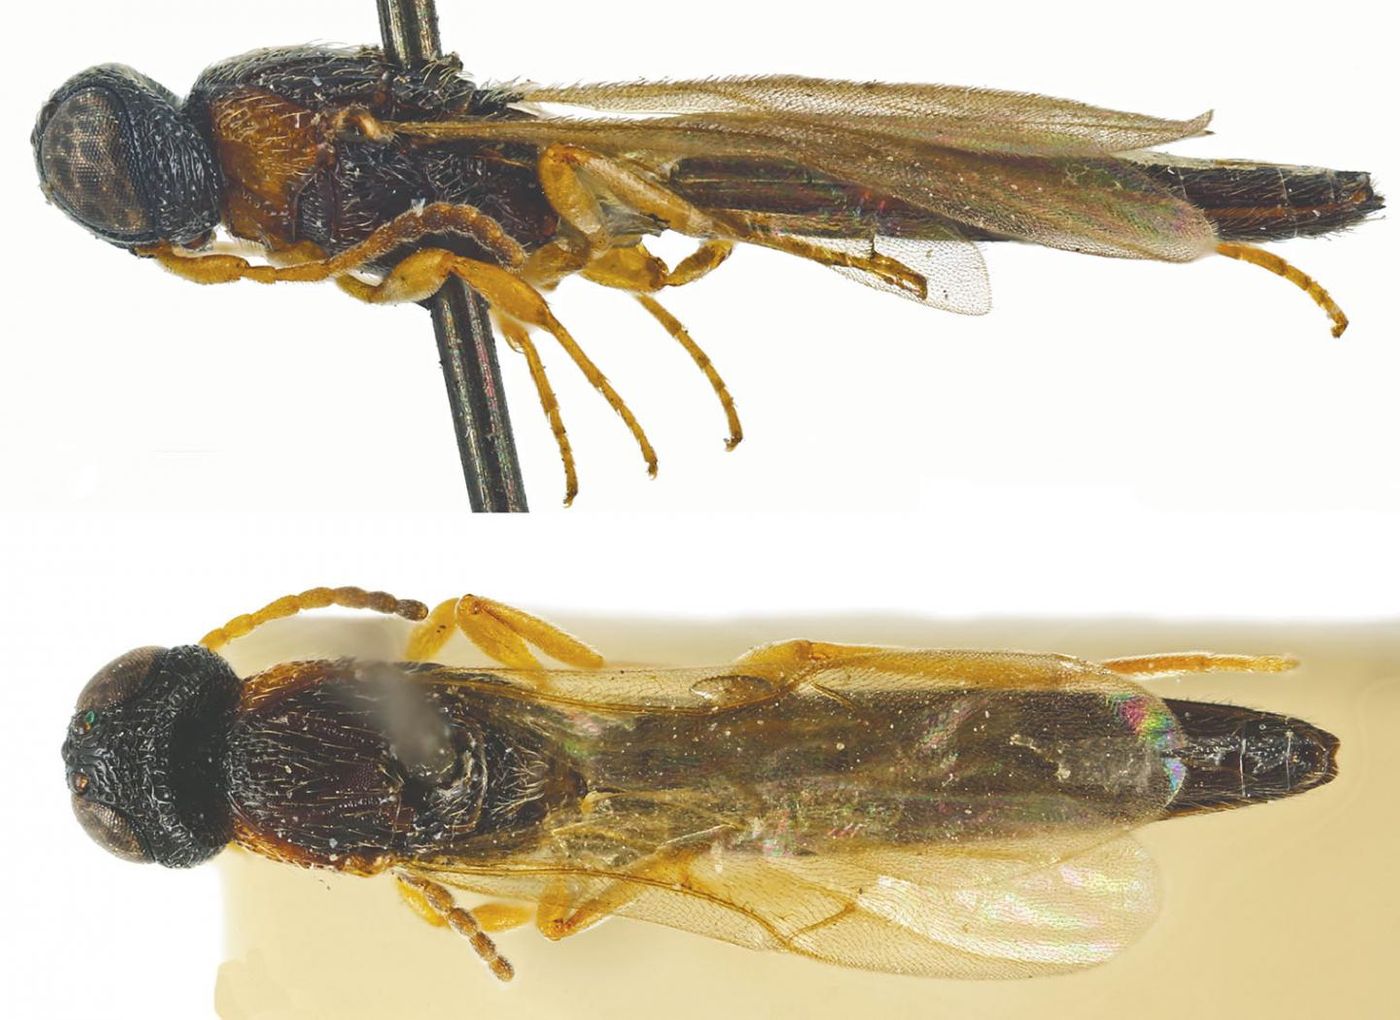 Pictured here is Chromoteleia congoana, the lone example from the 21 new species of parasitoid wasp that hails from Africa.